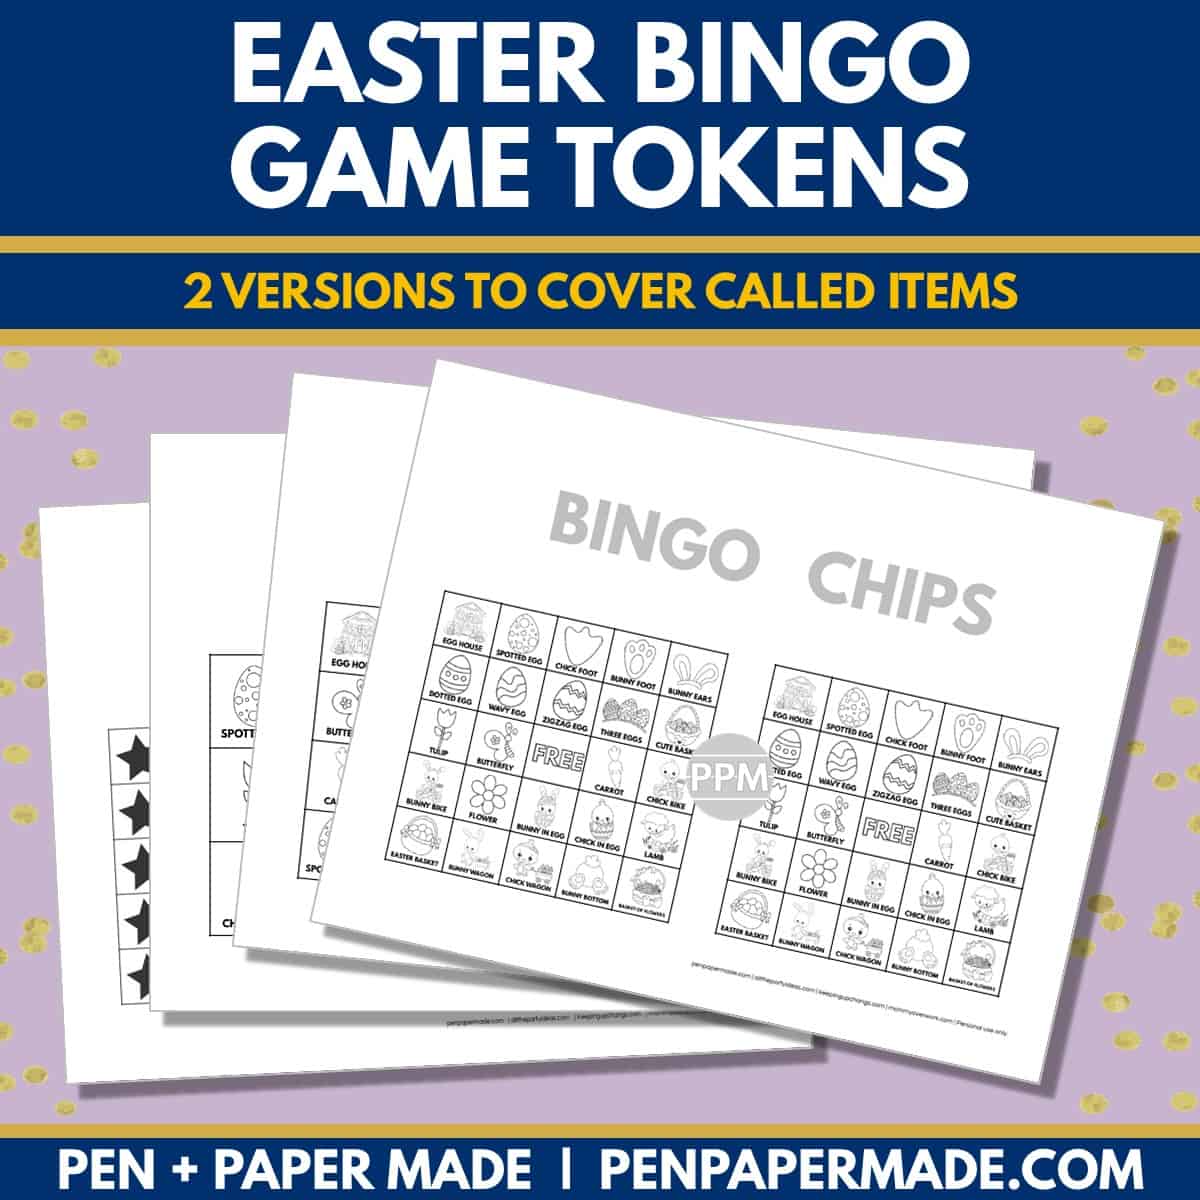 easter bingo card 5x5, 4x4, 3x3 game chips, tokens, markers.